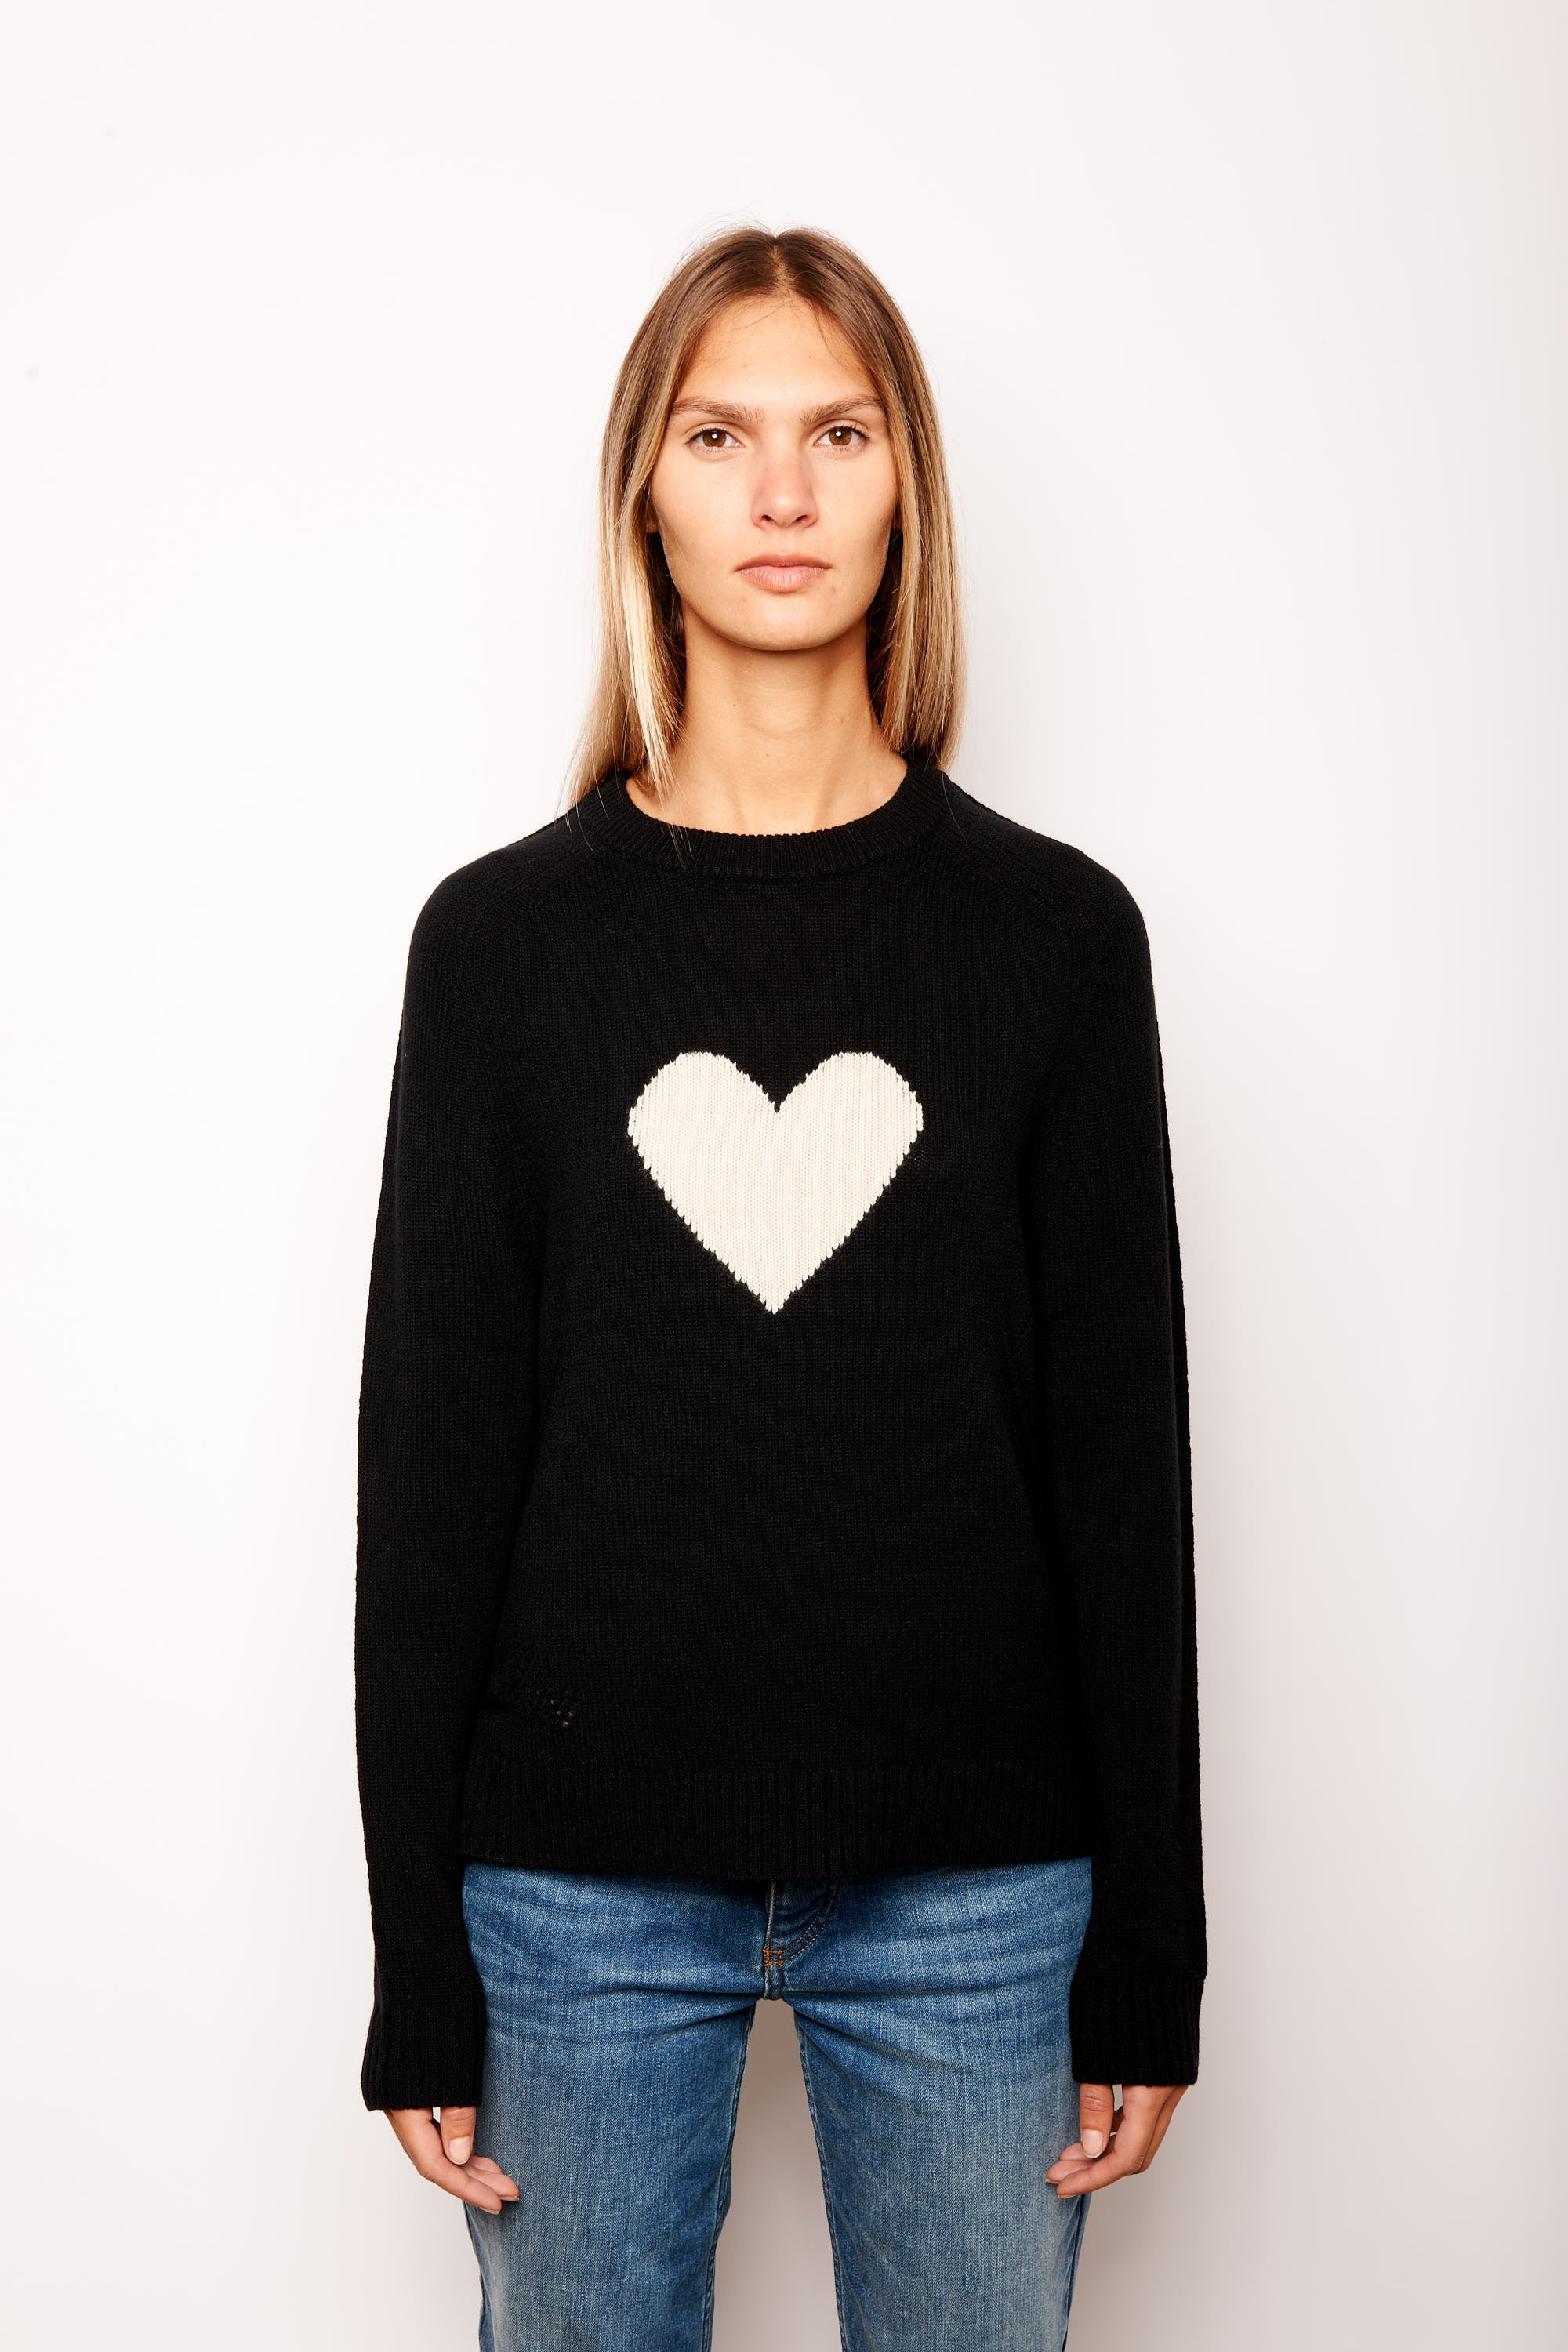 Lili WS Heart by Zadig & Voltaire